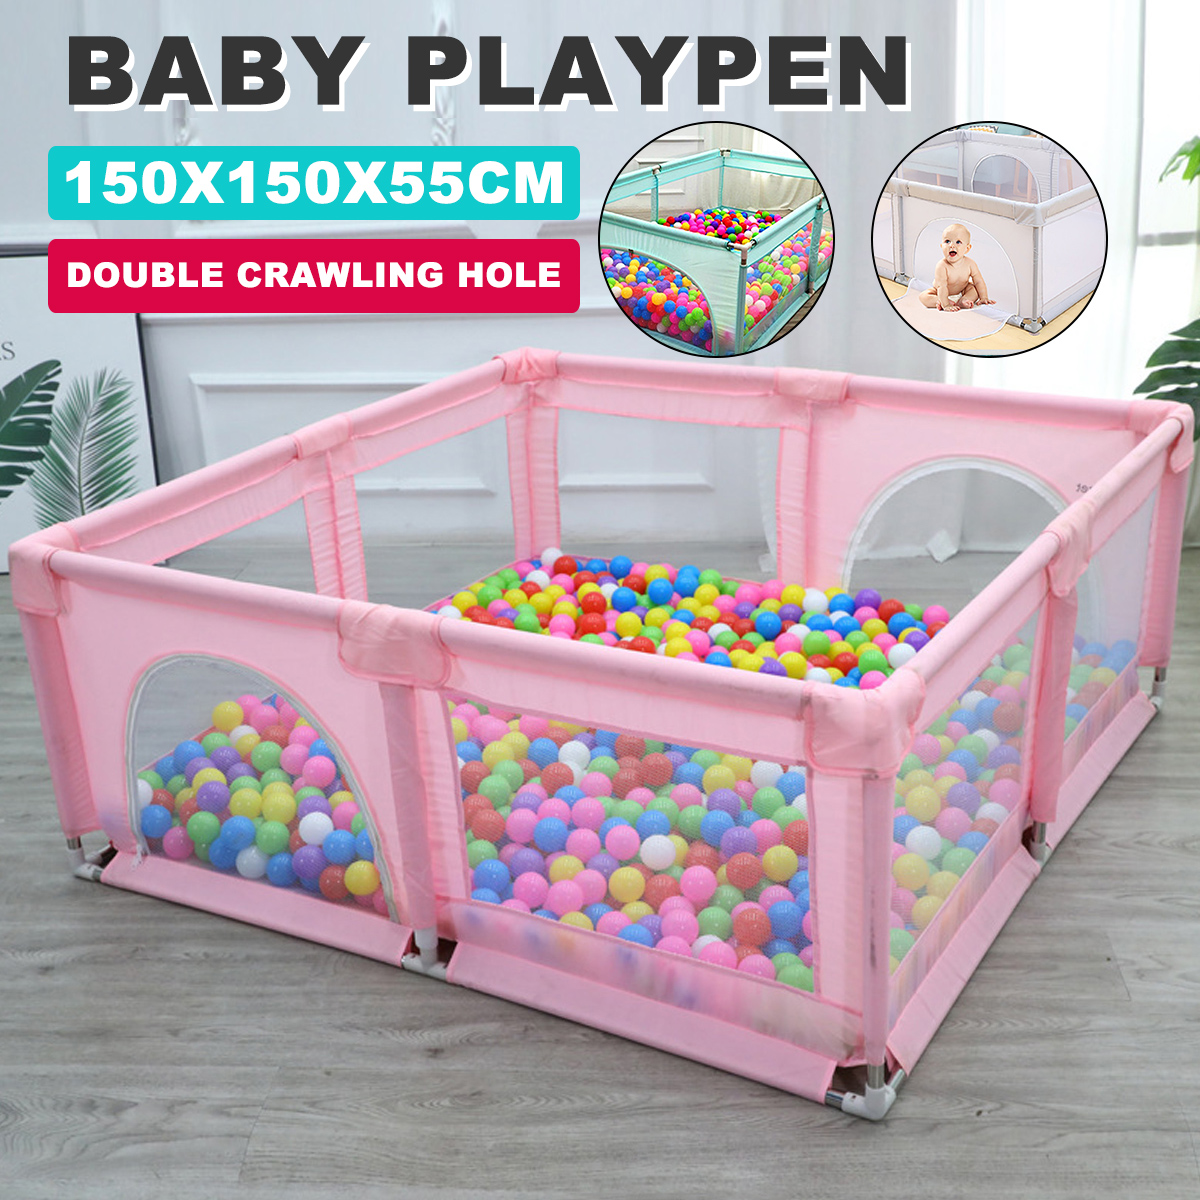 Bioby-15X15M-Childrens-Playground-furniture-Baby-Playpen-Bed-Barriers-Safety-Modular-Folding-Baby-Pa-1936073-1